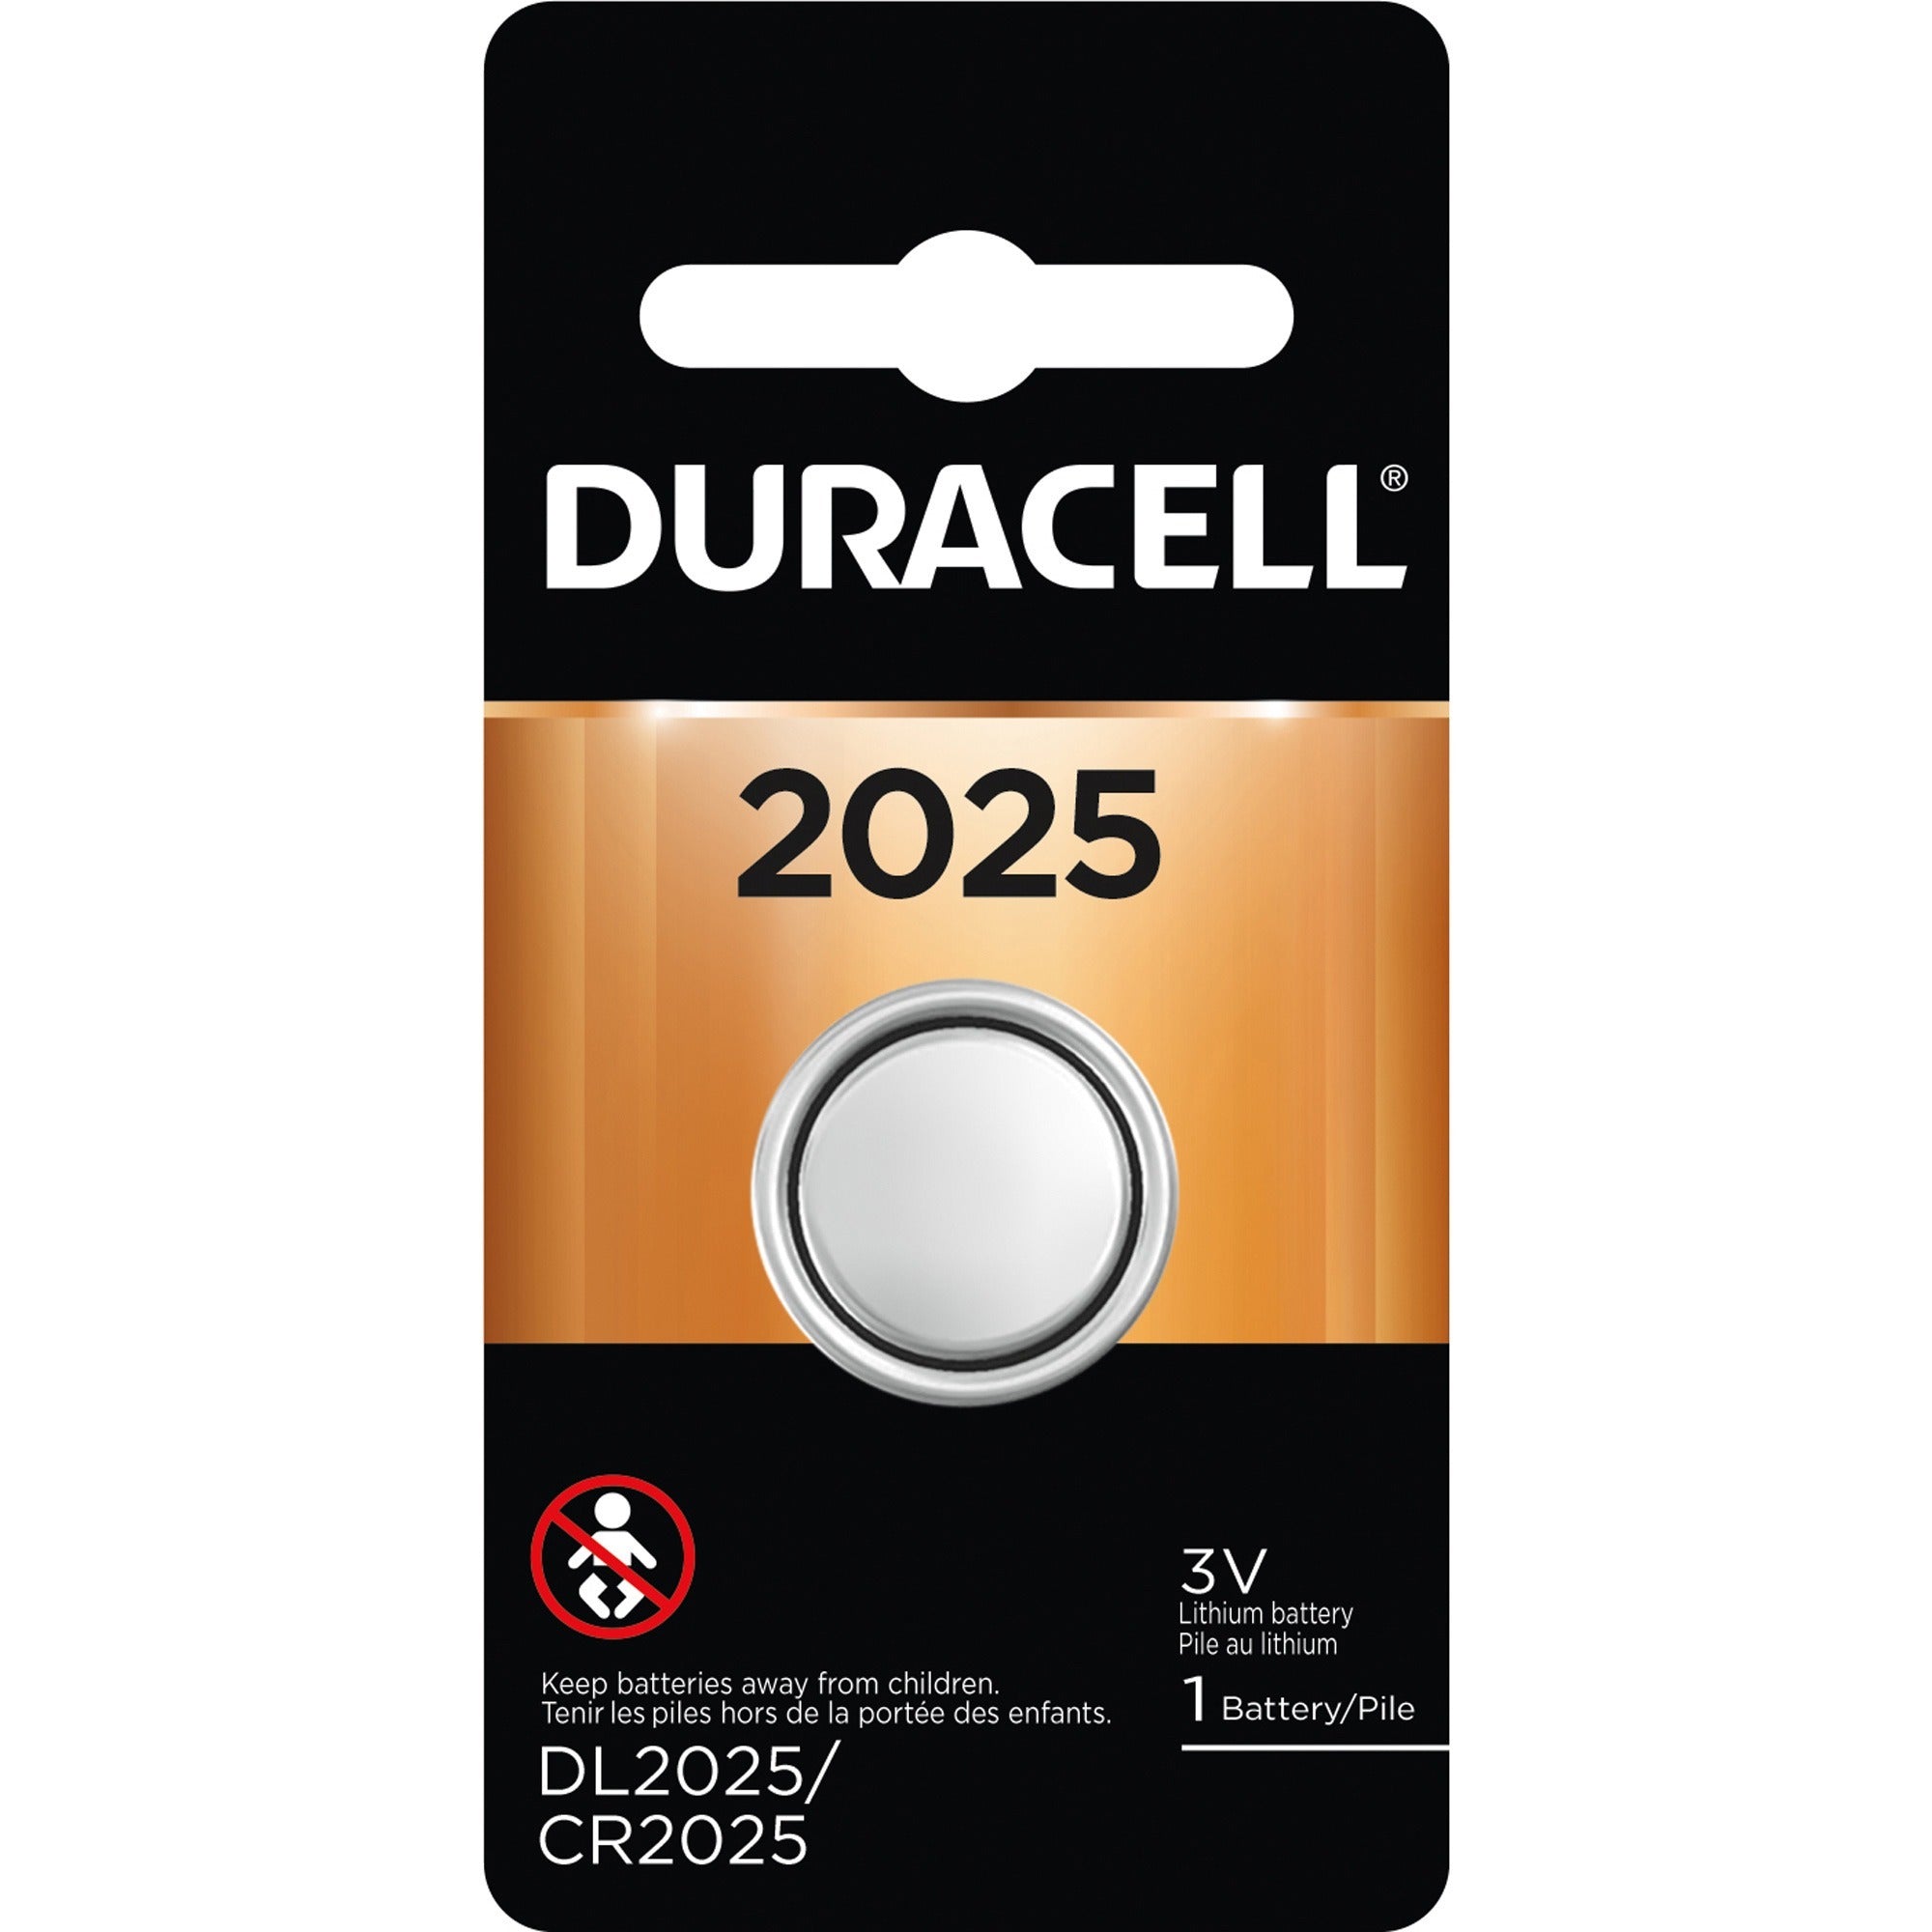 duracell-2025-coin-battery-6-packs-for-medical-equipment-security-device-health-fitness-monitoring-equipment-electronic-device-cr2025-3-v-dc-4-carton_durdl2025bct - 1